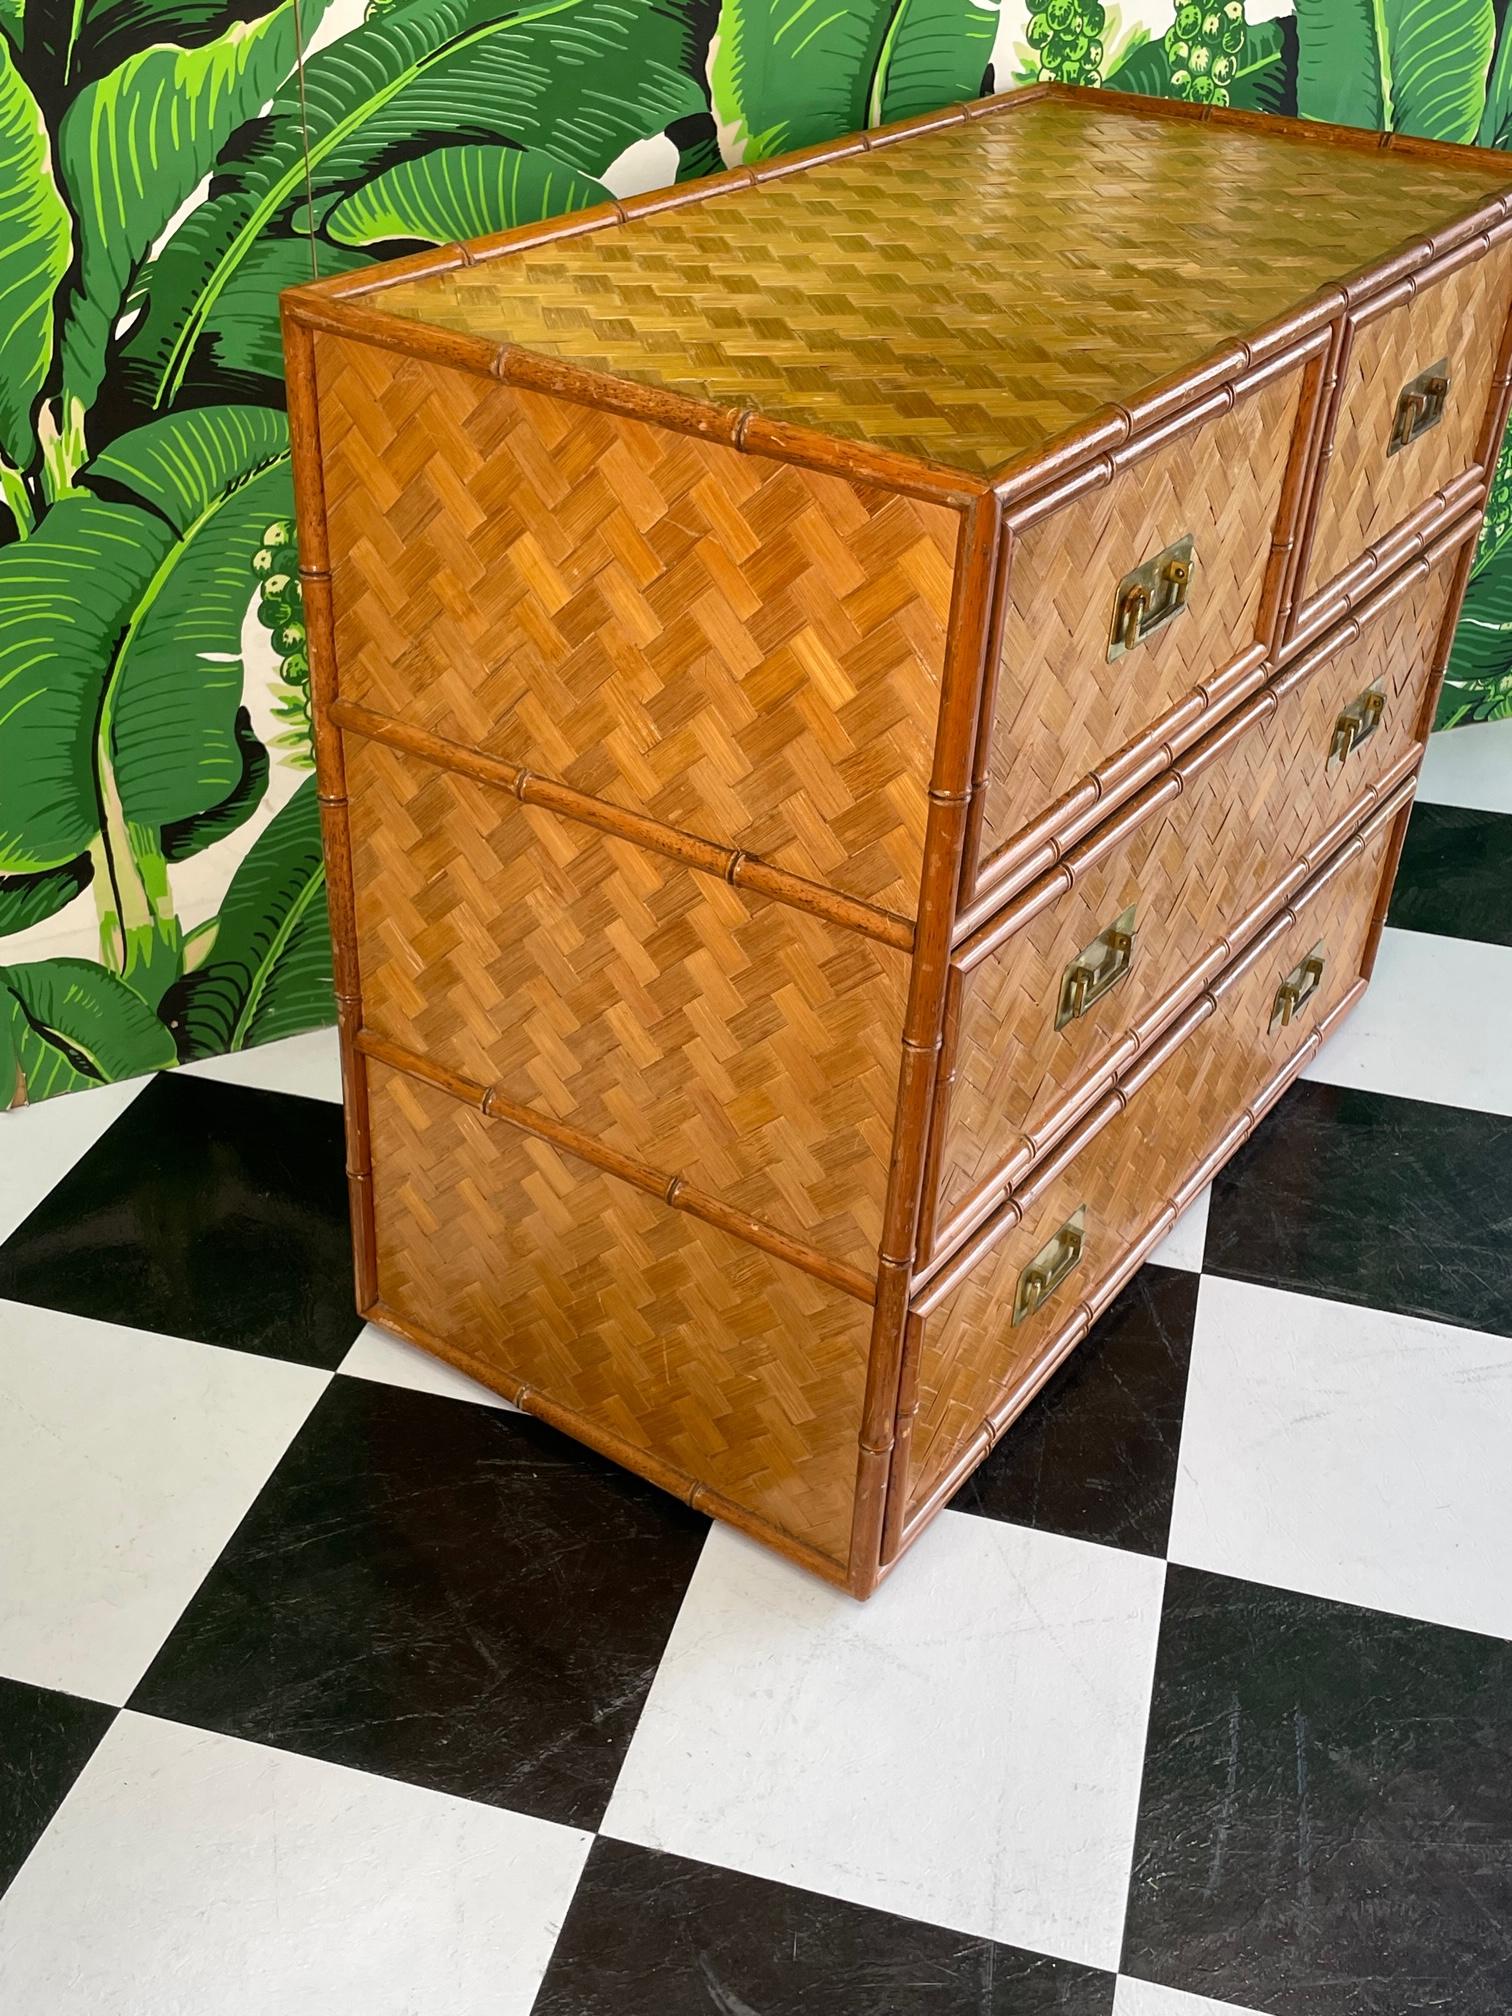 Wicker Basketweave and Faux Bamboo 4-Drawer Dresser In Good Condition For Sale In Jacksonville, FL